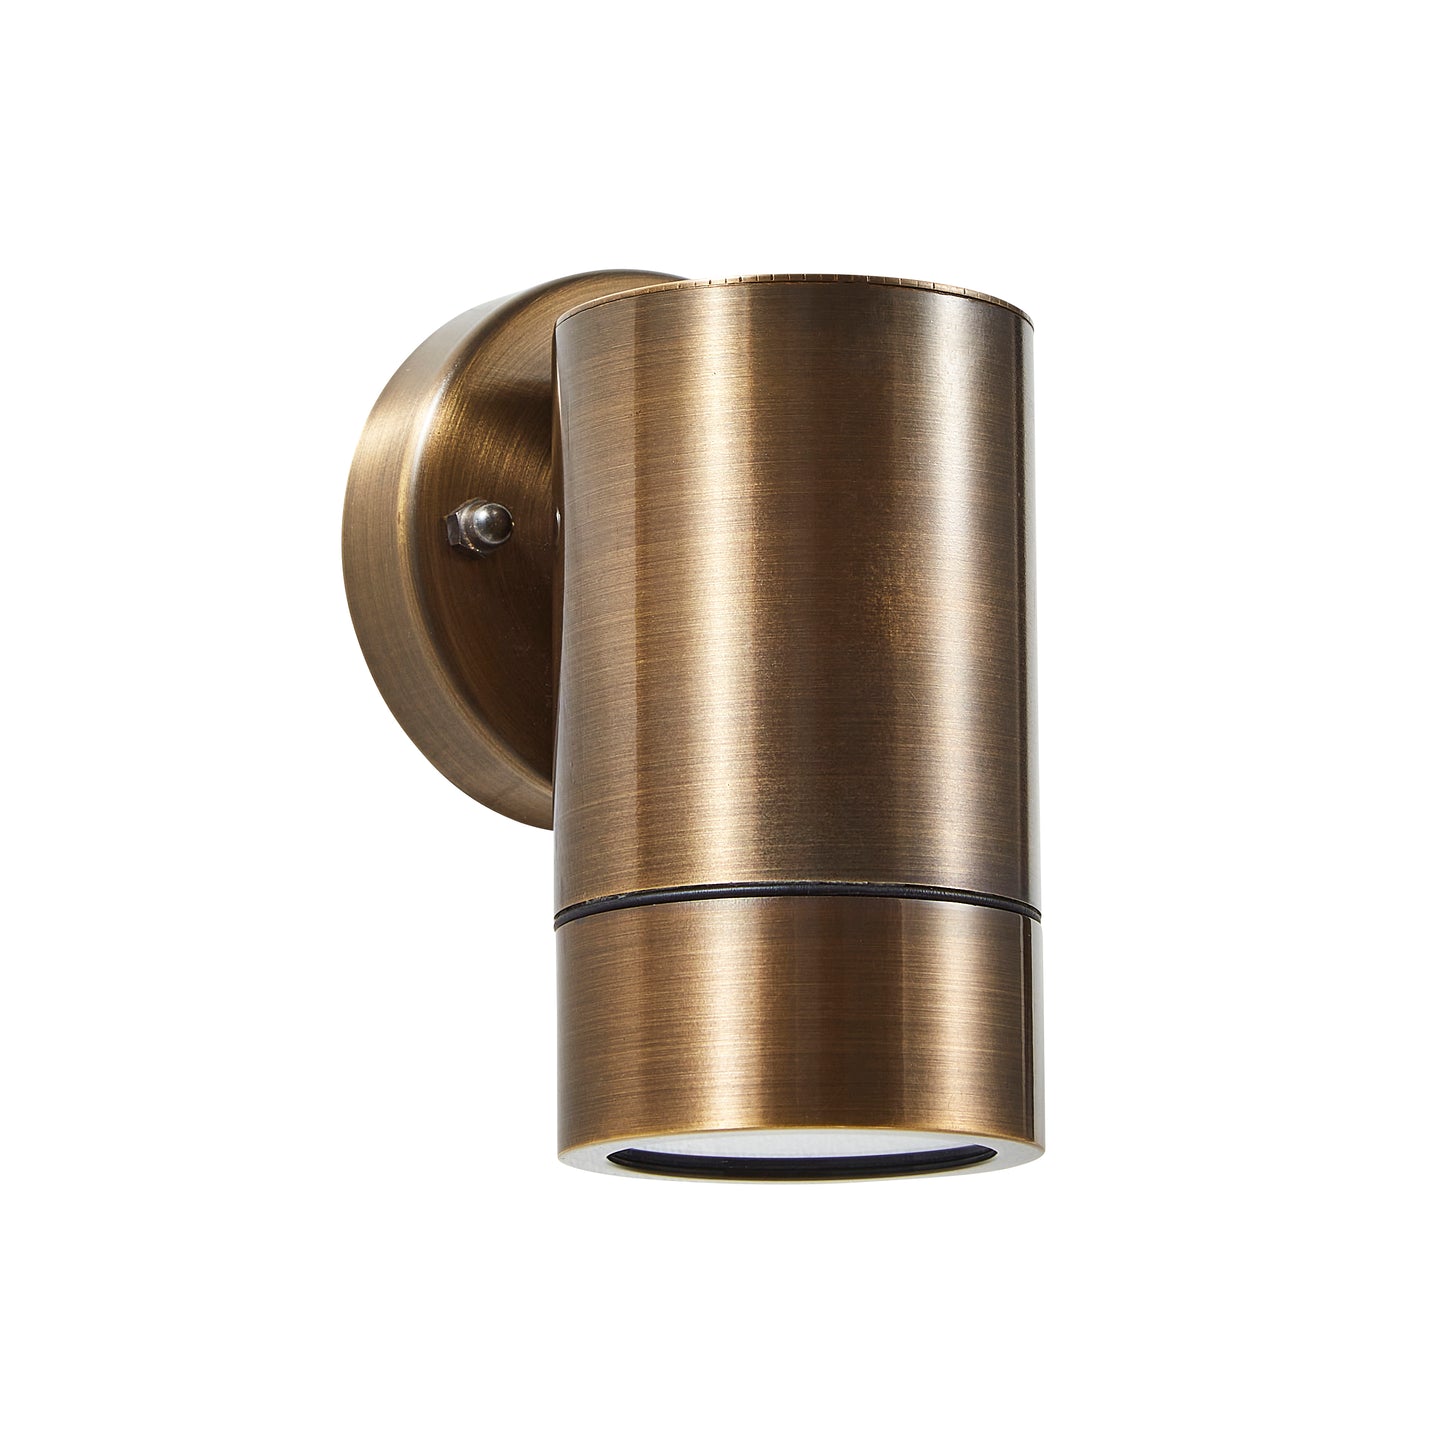 Our Liam bronze outdoor wall mounted single cylinder outdoor light would look perfect in a modern or more traditional home design. Outside wall lights can provide atmospheric light in your garden, at the front door or on the terrace as well as a great security solution. It is designed for durability and longevity with its robust material producing a fully weatherproof and water-resistant light fitting. Use LED bulbs to make this light energy efficient and low cost to run.